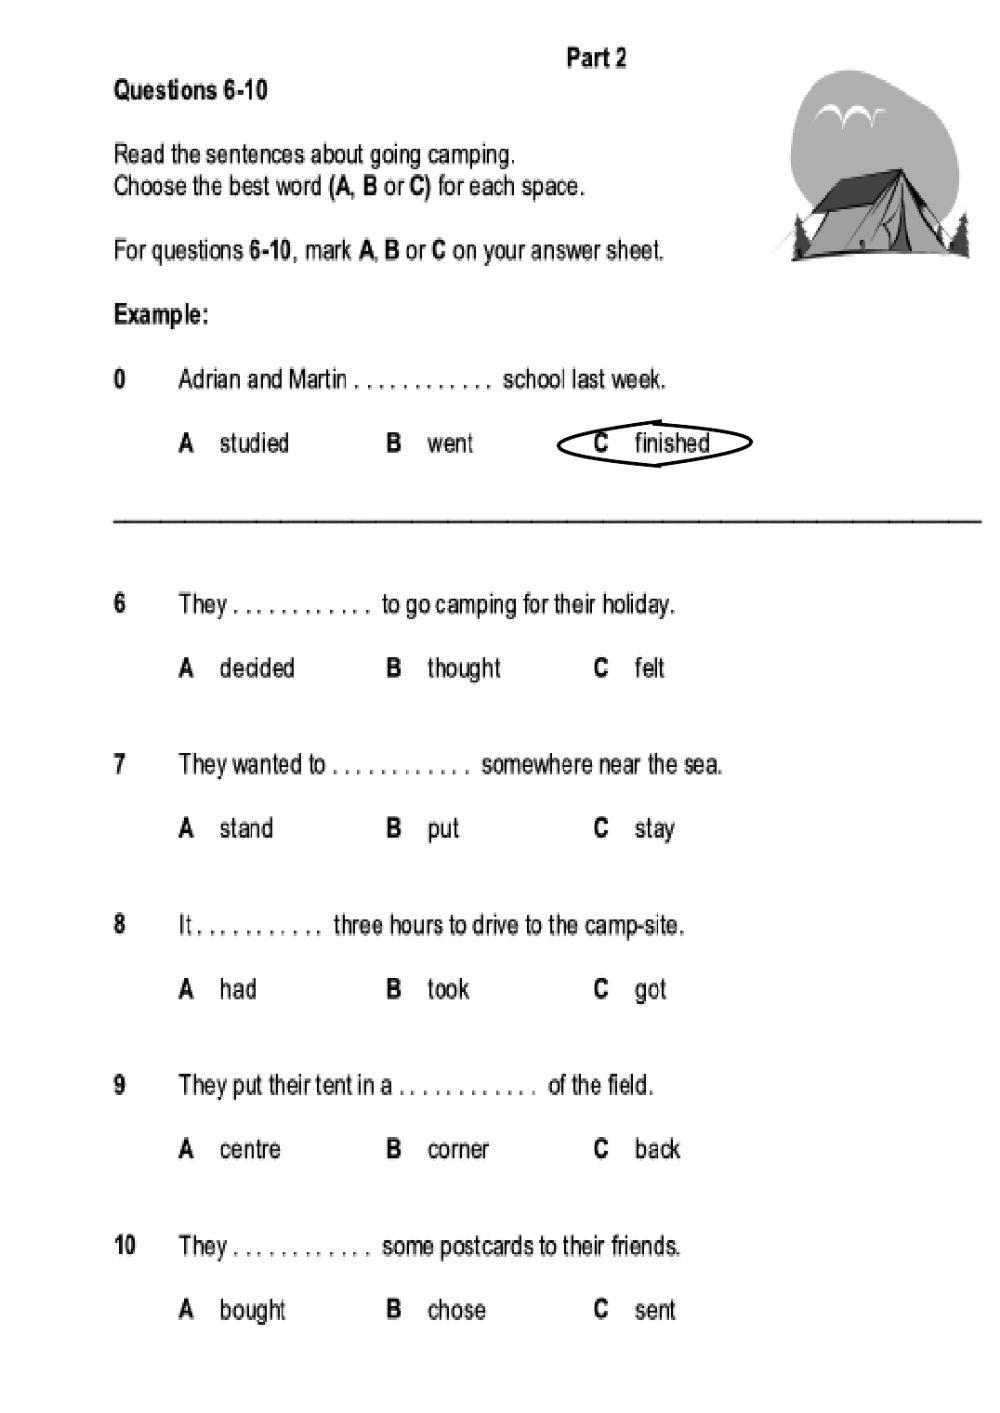 General use of English KET TEST - Reading